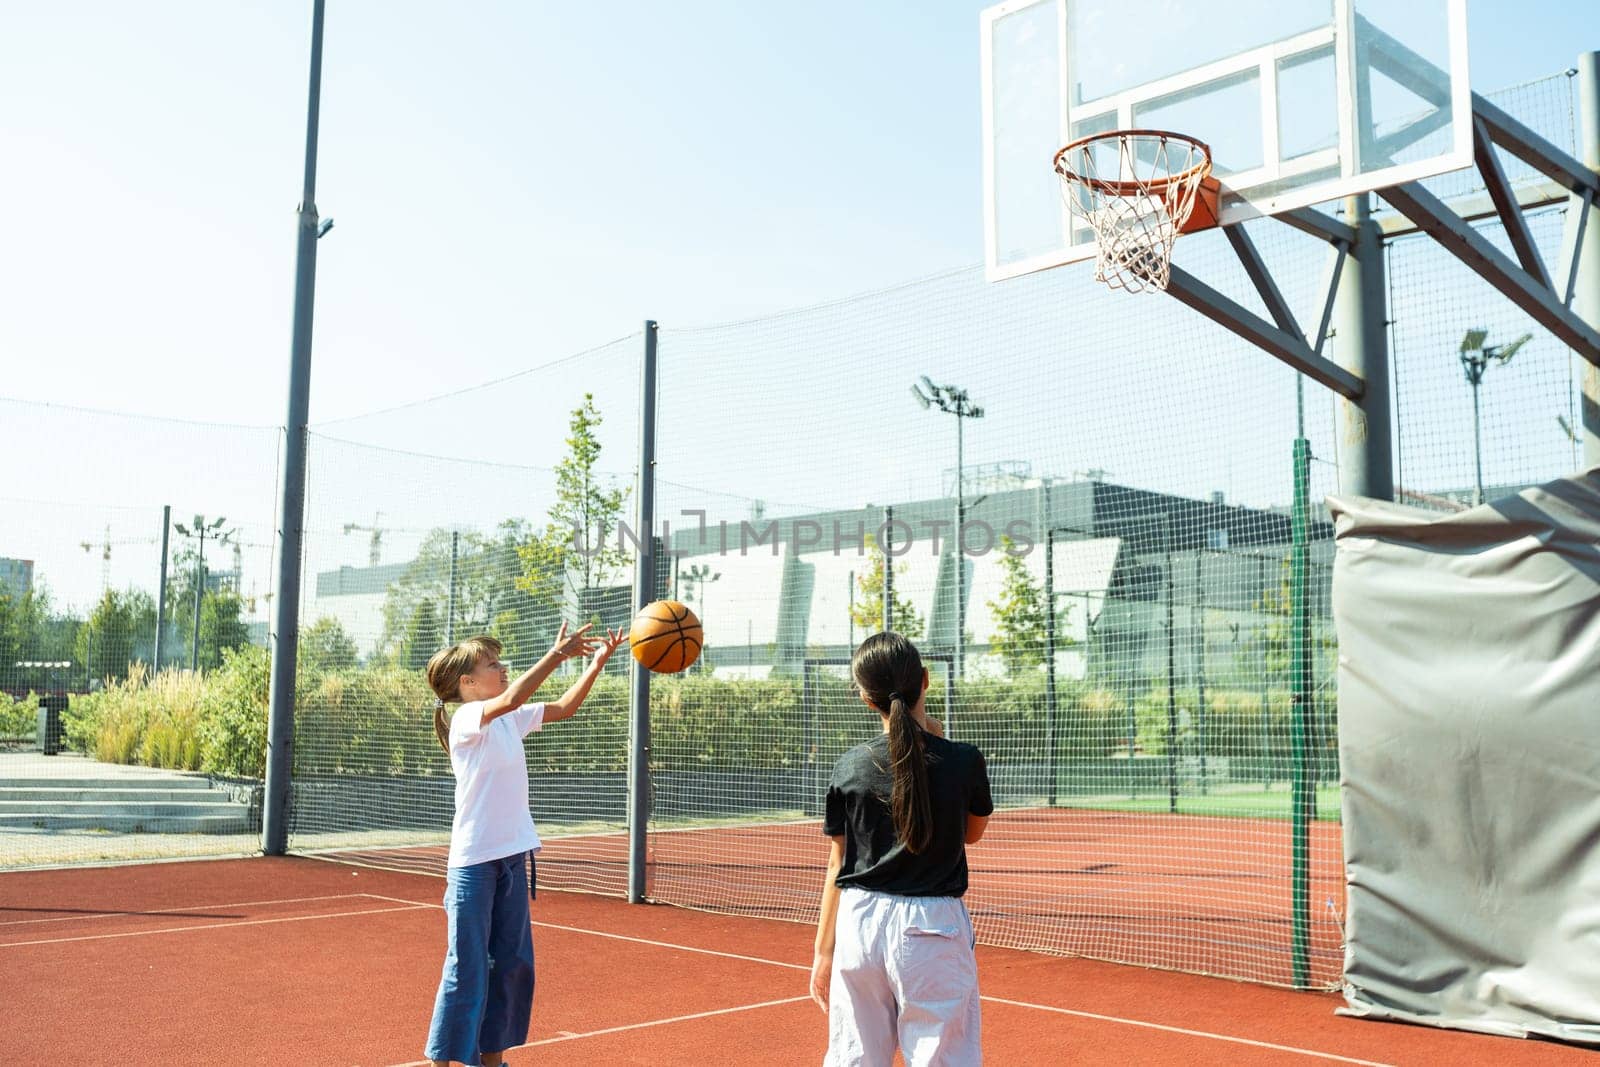 Concept of sports, hobbies and healthy lifestyle. Young people playing basketball on playground outdoors by Andelov13